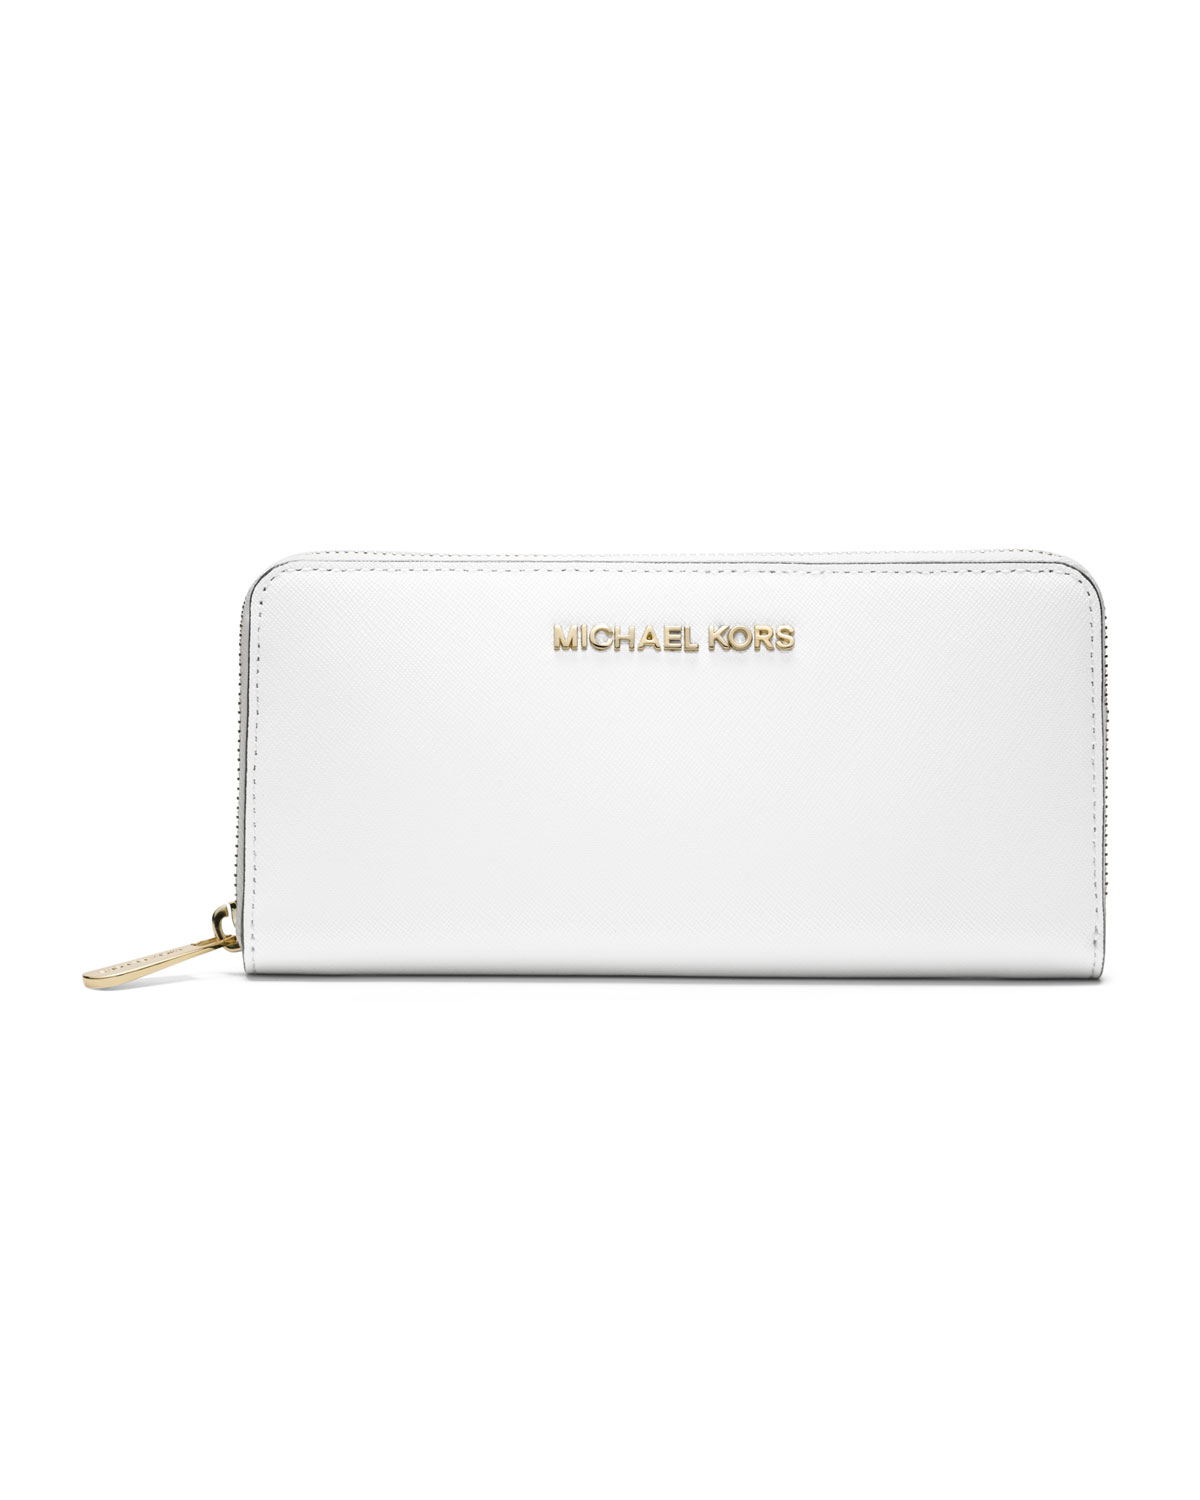 Michael kors Michael Jet Set Continental Saffiano Wallet in White | Lyst